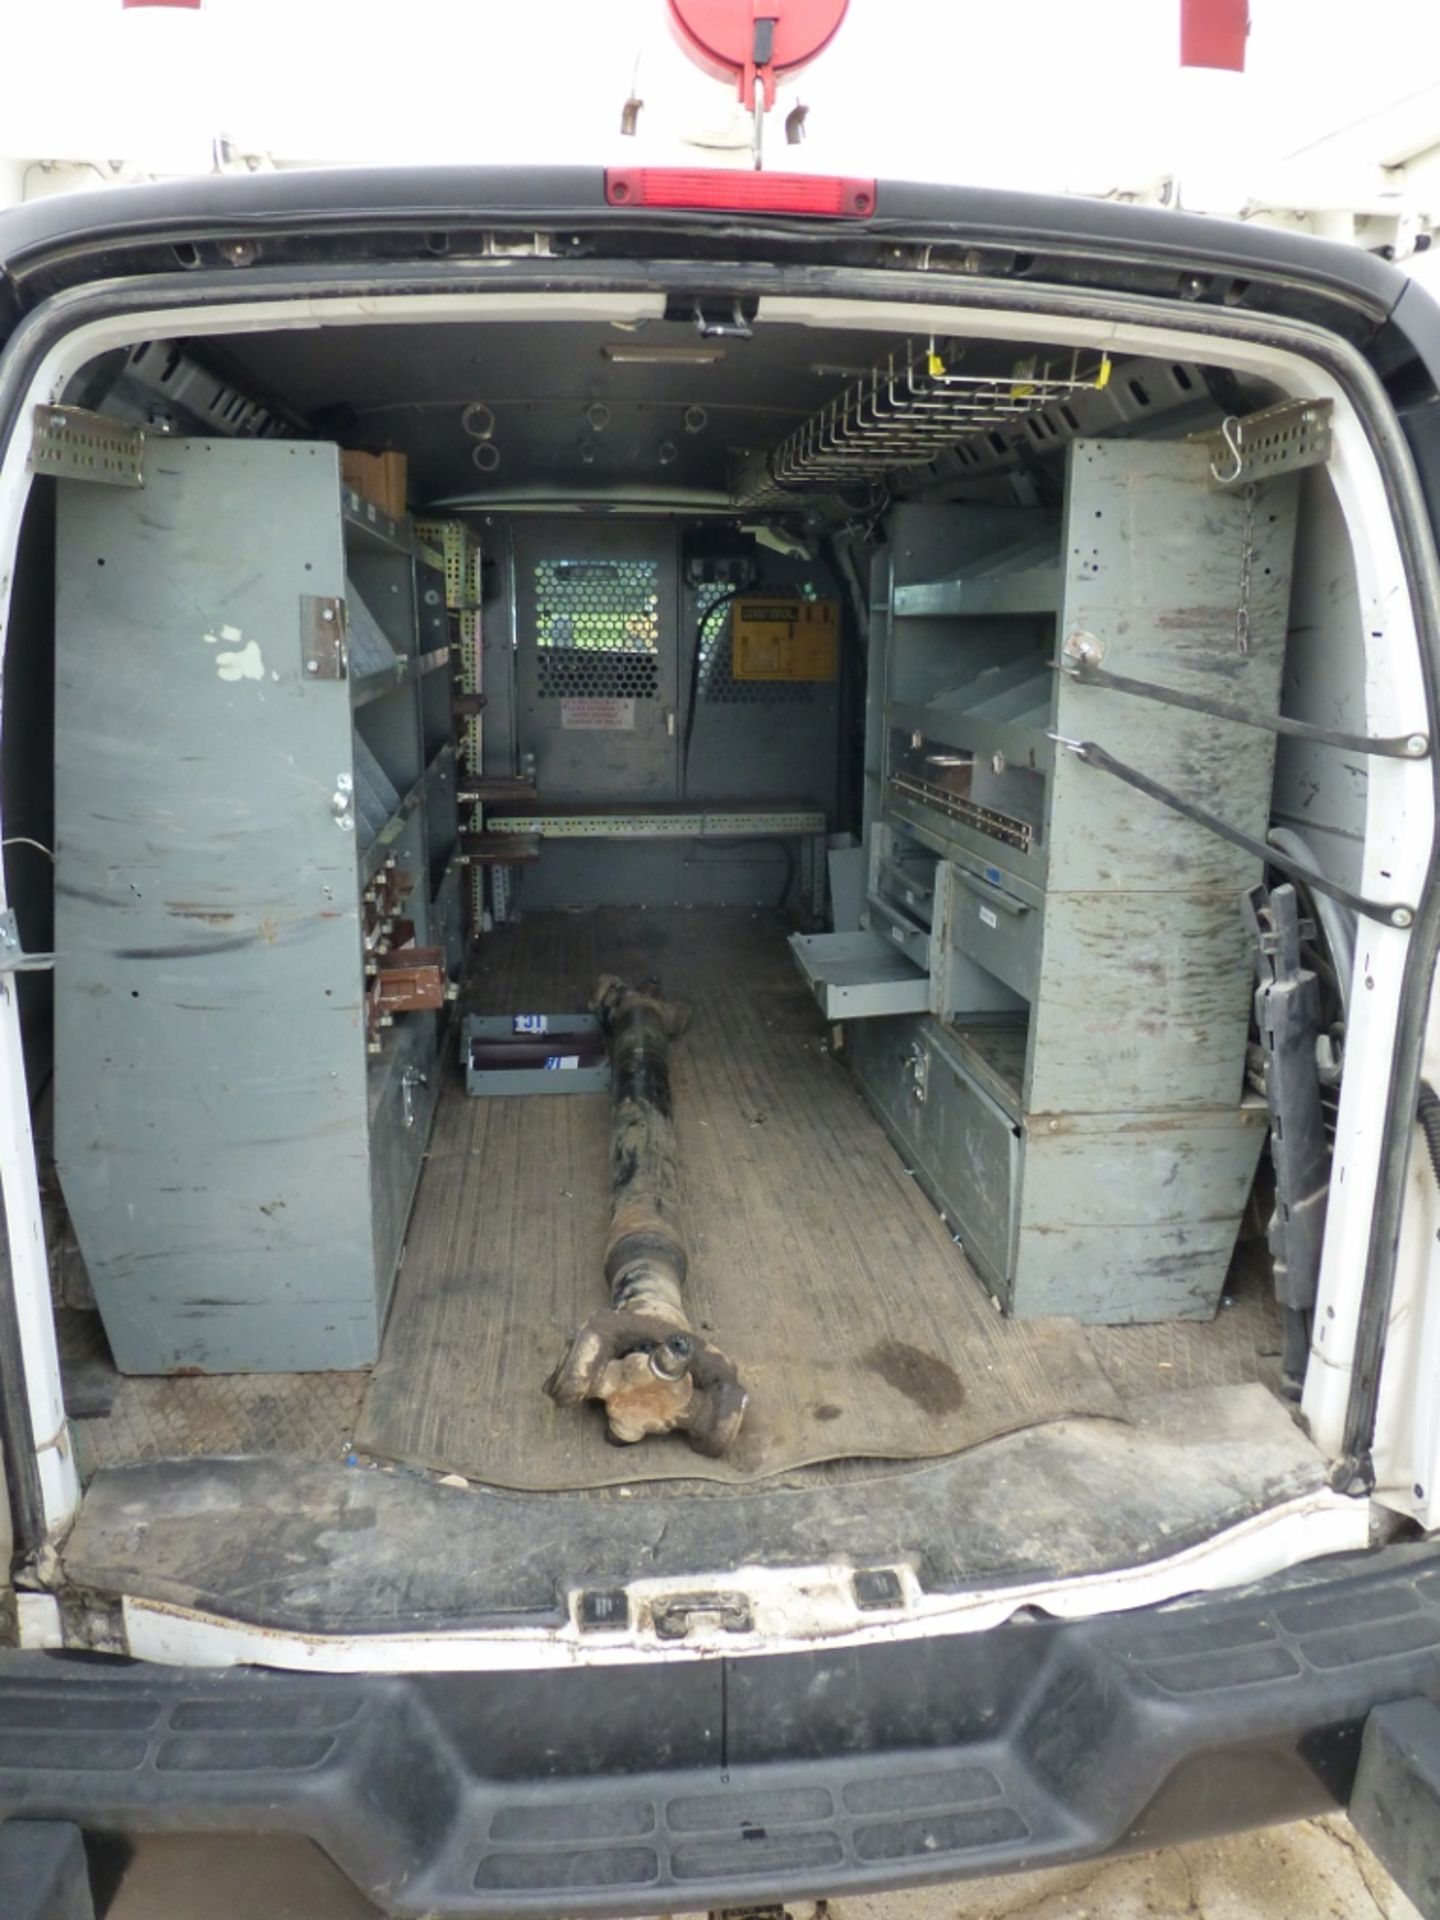 2008 GMC Cargo van, with shelf drawer units, automatic, a.c., manual windows, 254,605 unverified - Image 8 of 22